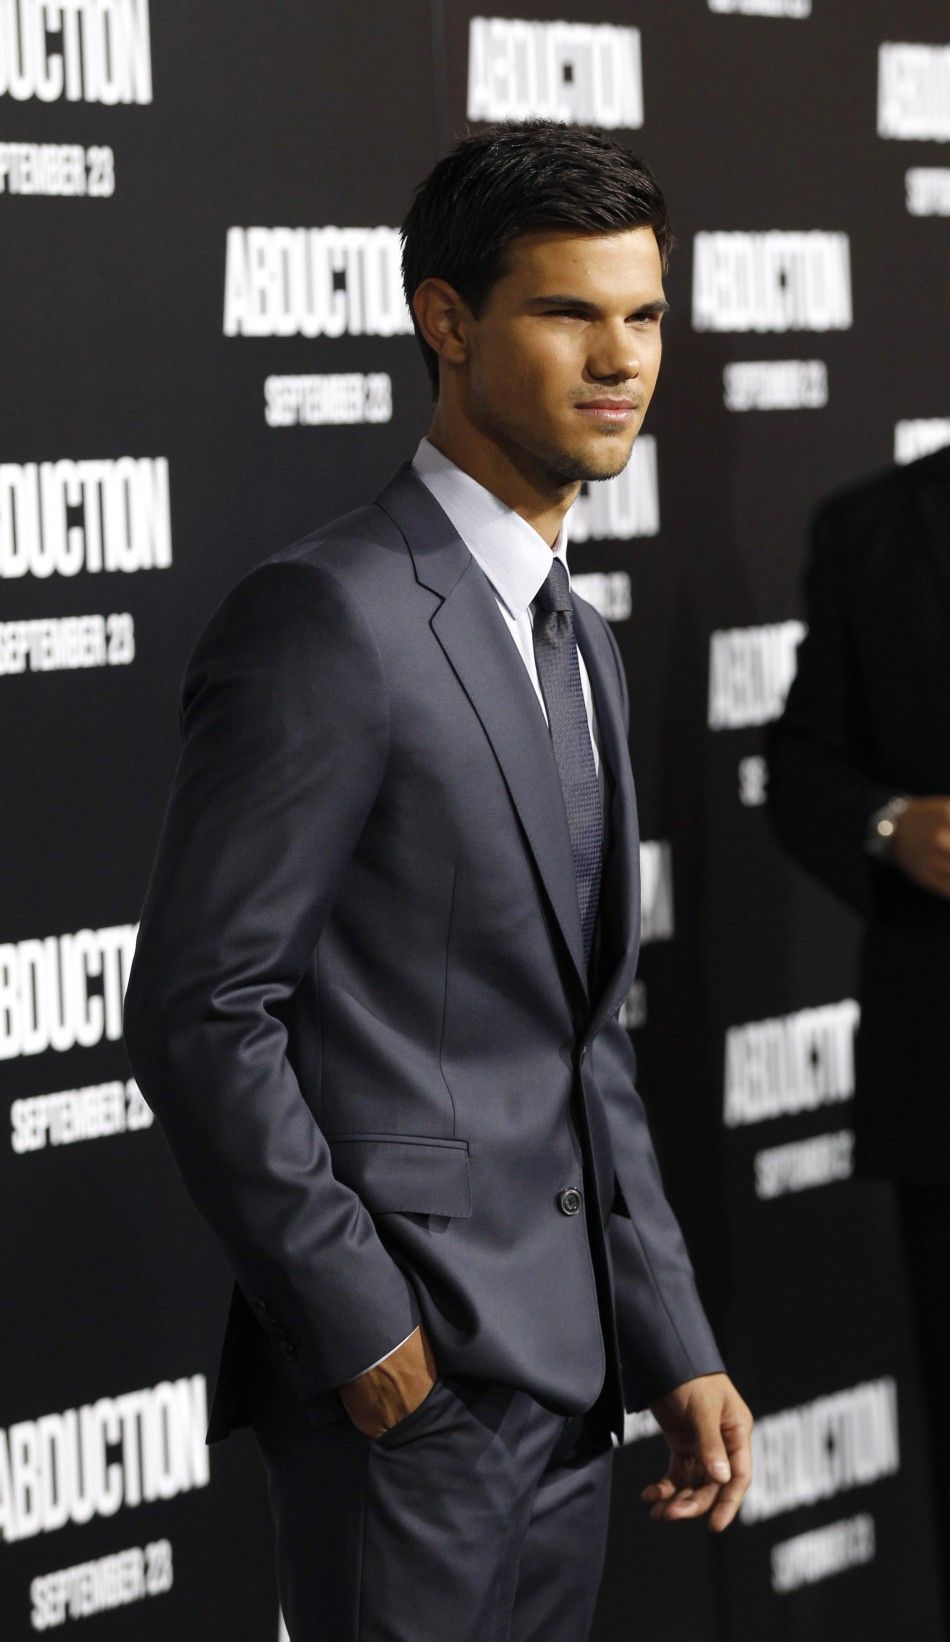 Taylor Lautner poses during the world premiere of quotAbductionquot in Hollywood